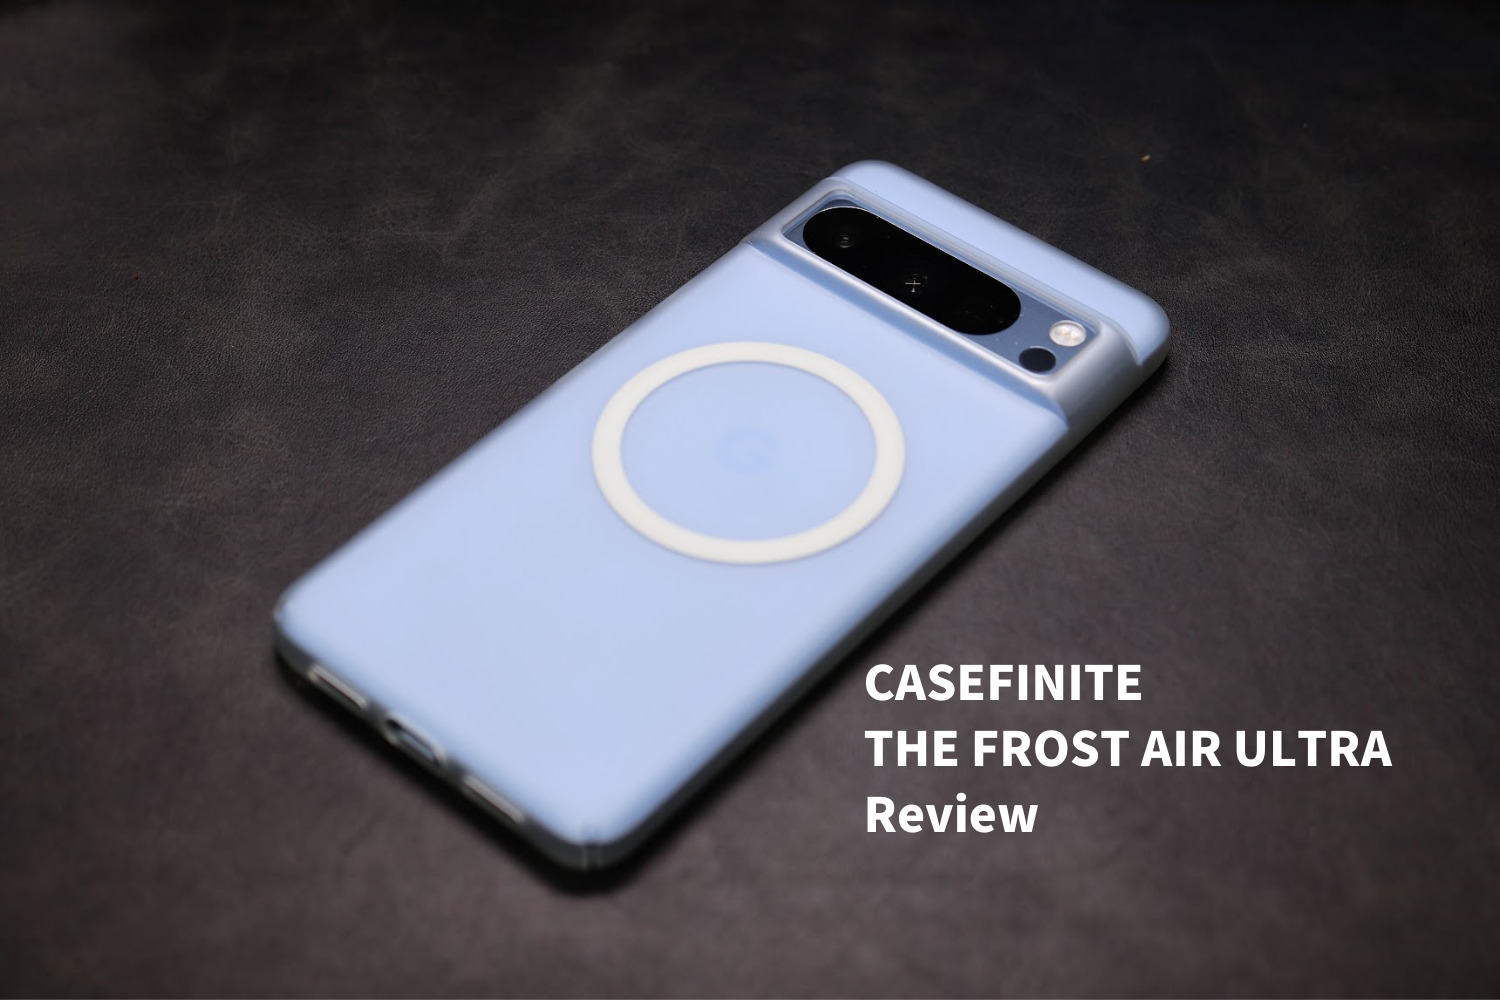 The Frost Air Ultra